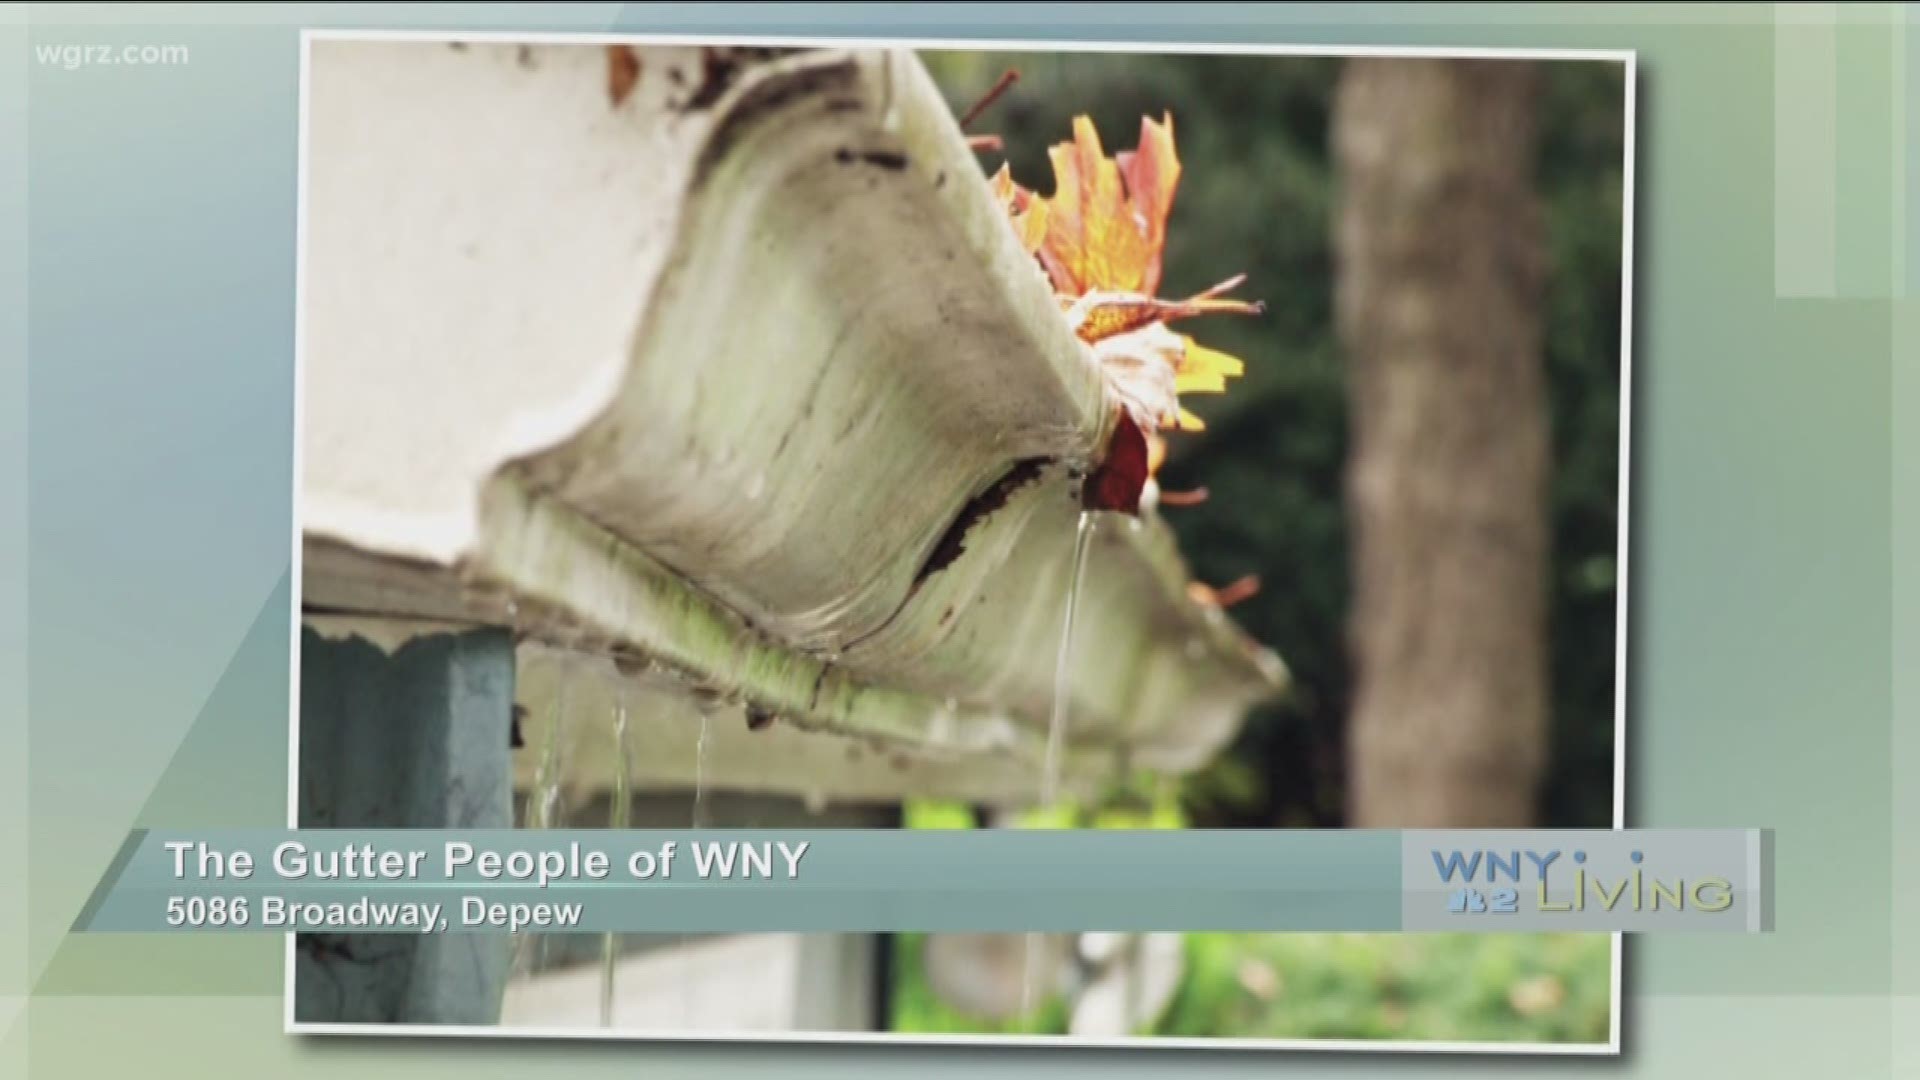 WNY Living - April 20 - The Gutter People of WNY (SPONSORED CONTENT)